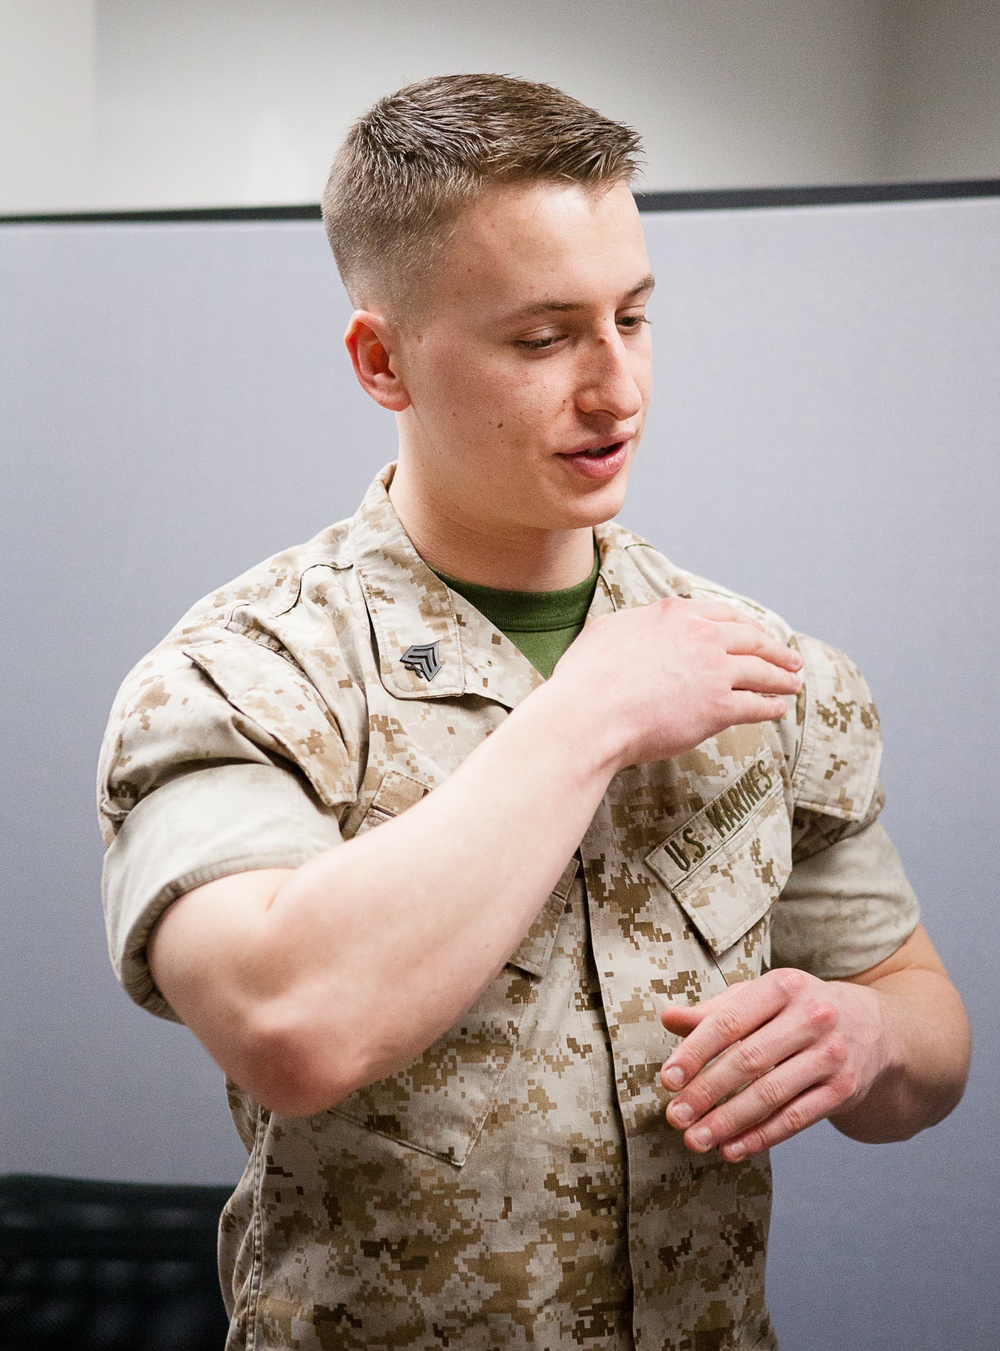 Sleeves up! 'Sun’s out, guns out' throughout the Corps